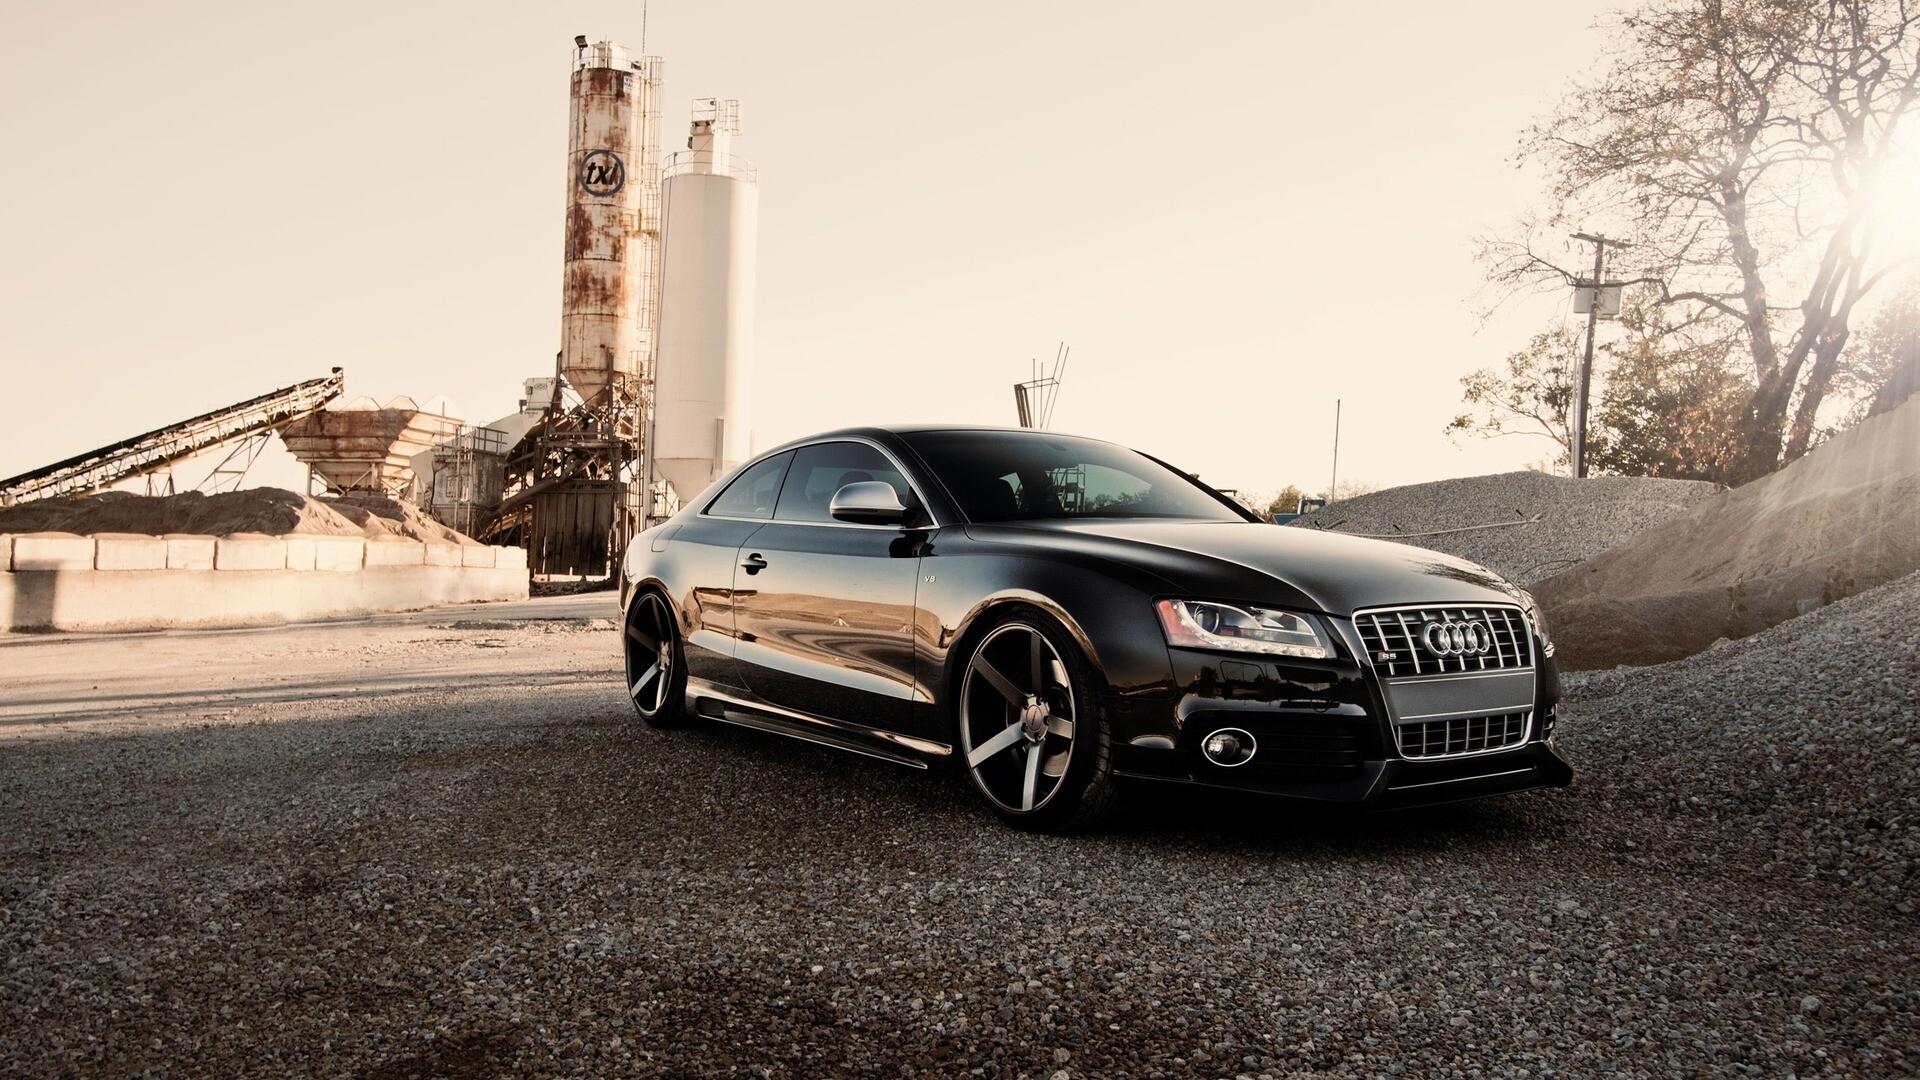 Audi: A German automotive manufacturer of luxury vehicles, A subsidiary of Volkswagen AG. 1920x1080 Full HD Wallpaper.